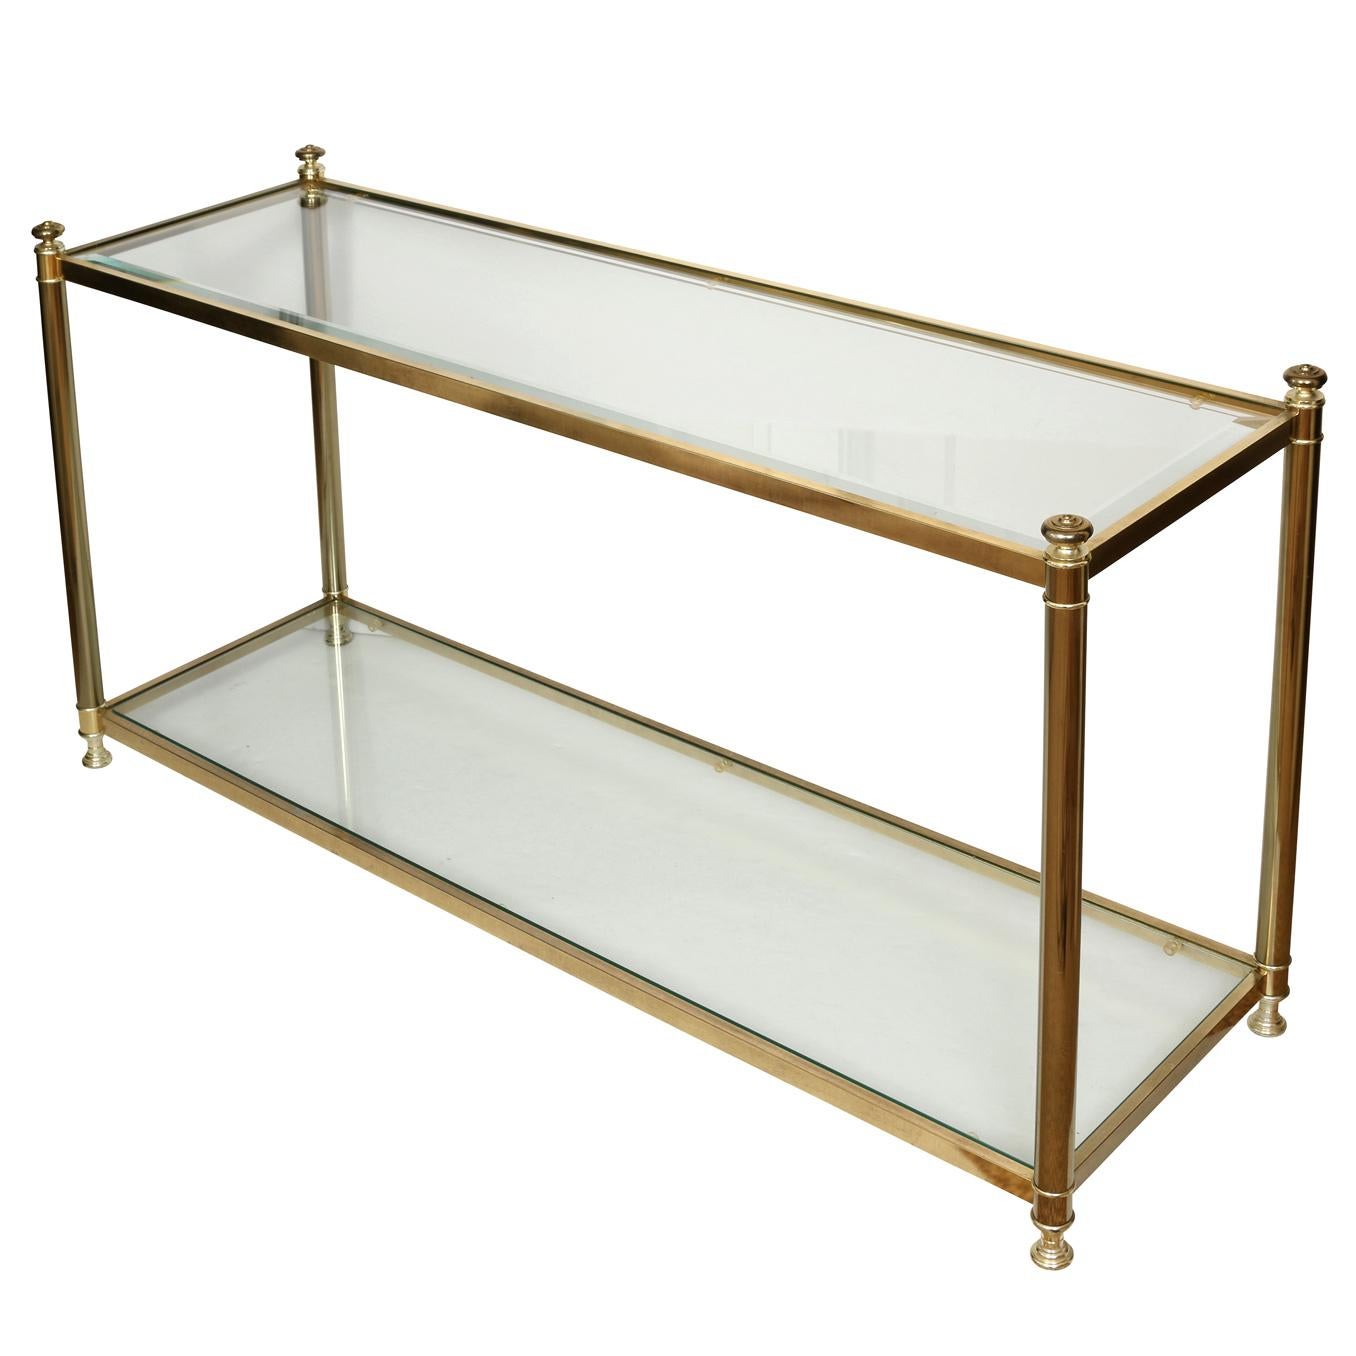 A Regency style vintage brass and glass console table with a lower glass shelf.